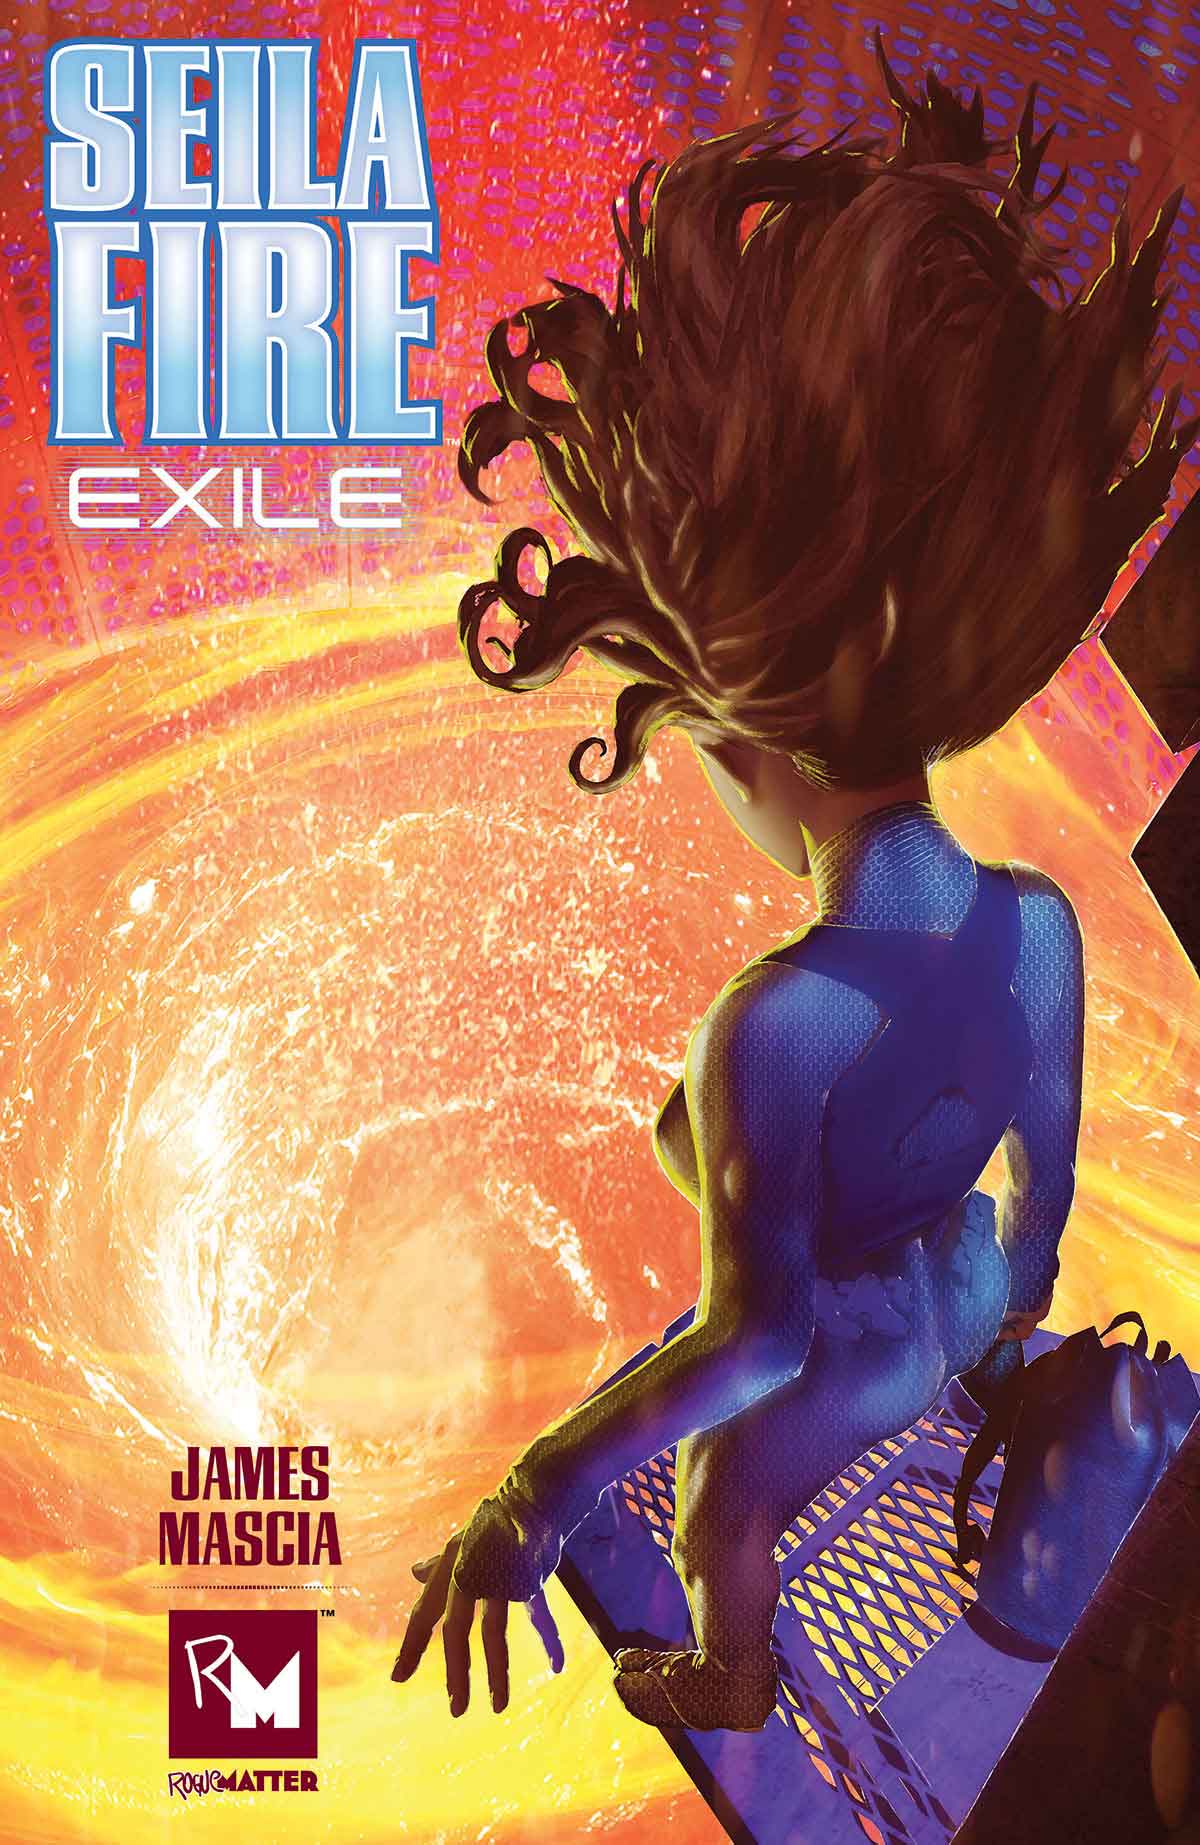 Cover of "Sella Fire Exile" book: A fiery phoenix rising from ashes, symbolizing rebirth and transformation